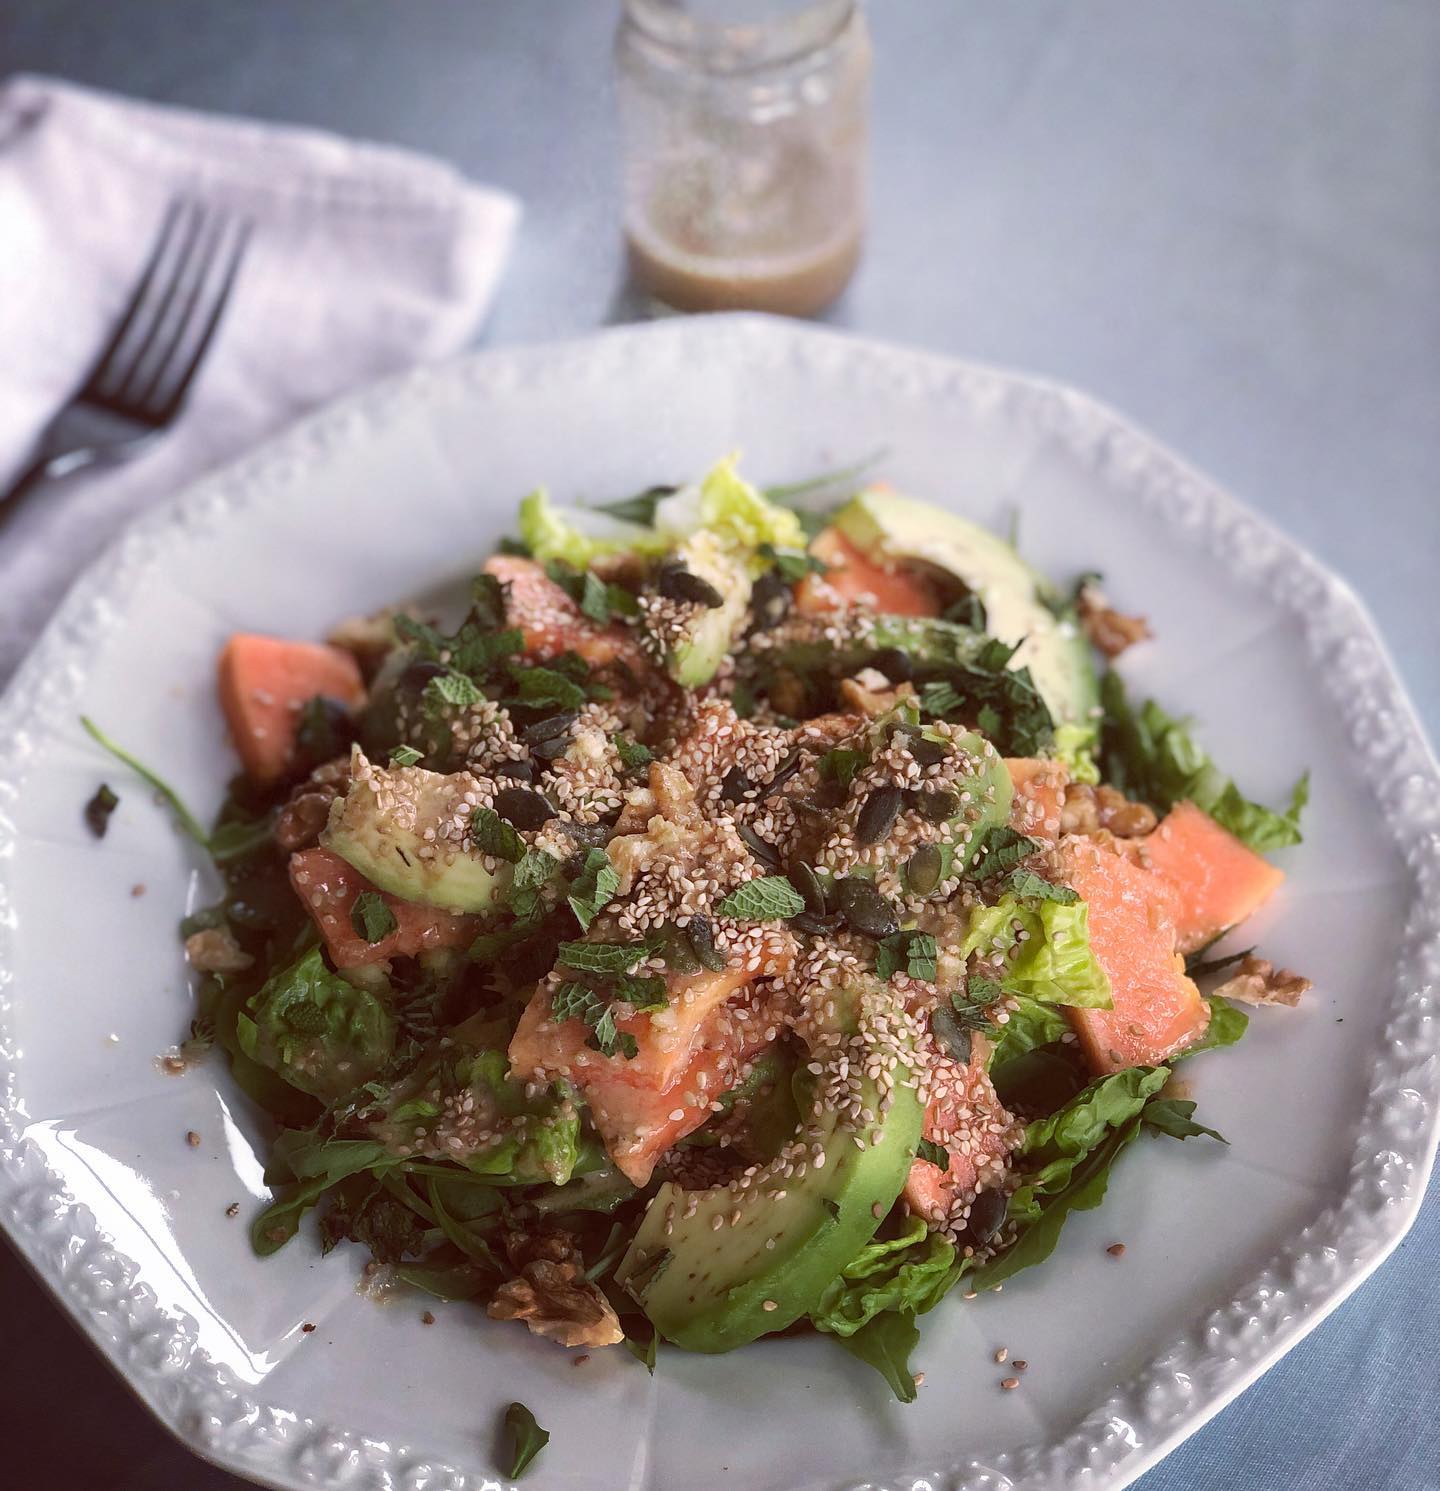 Pimp up your salad...by adding nuts, seeds, fruits, avocado, dark green leaves and healthy dressings and triple the nutrient content. Here we have papaya, avo, sesame and pumpkin seeds, walnuts, rocket and little gem with tahini, soy & lime dressing #salad #nutritionistapproved #vegan #lunch #organic #nutrition #yogiclife #yogicdiet #vegetarian #healthy